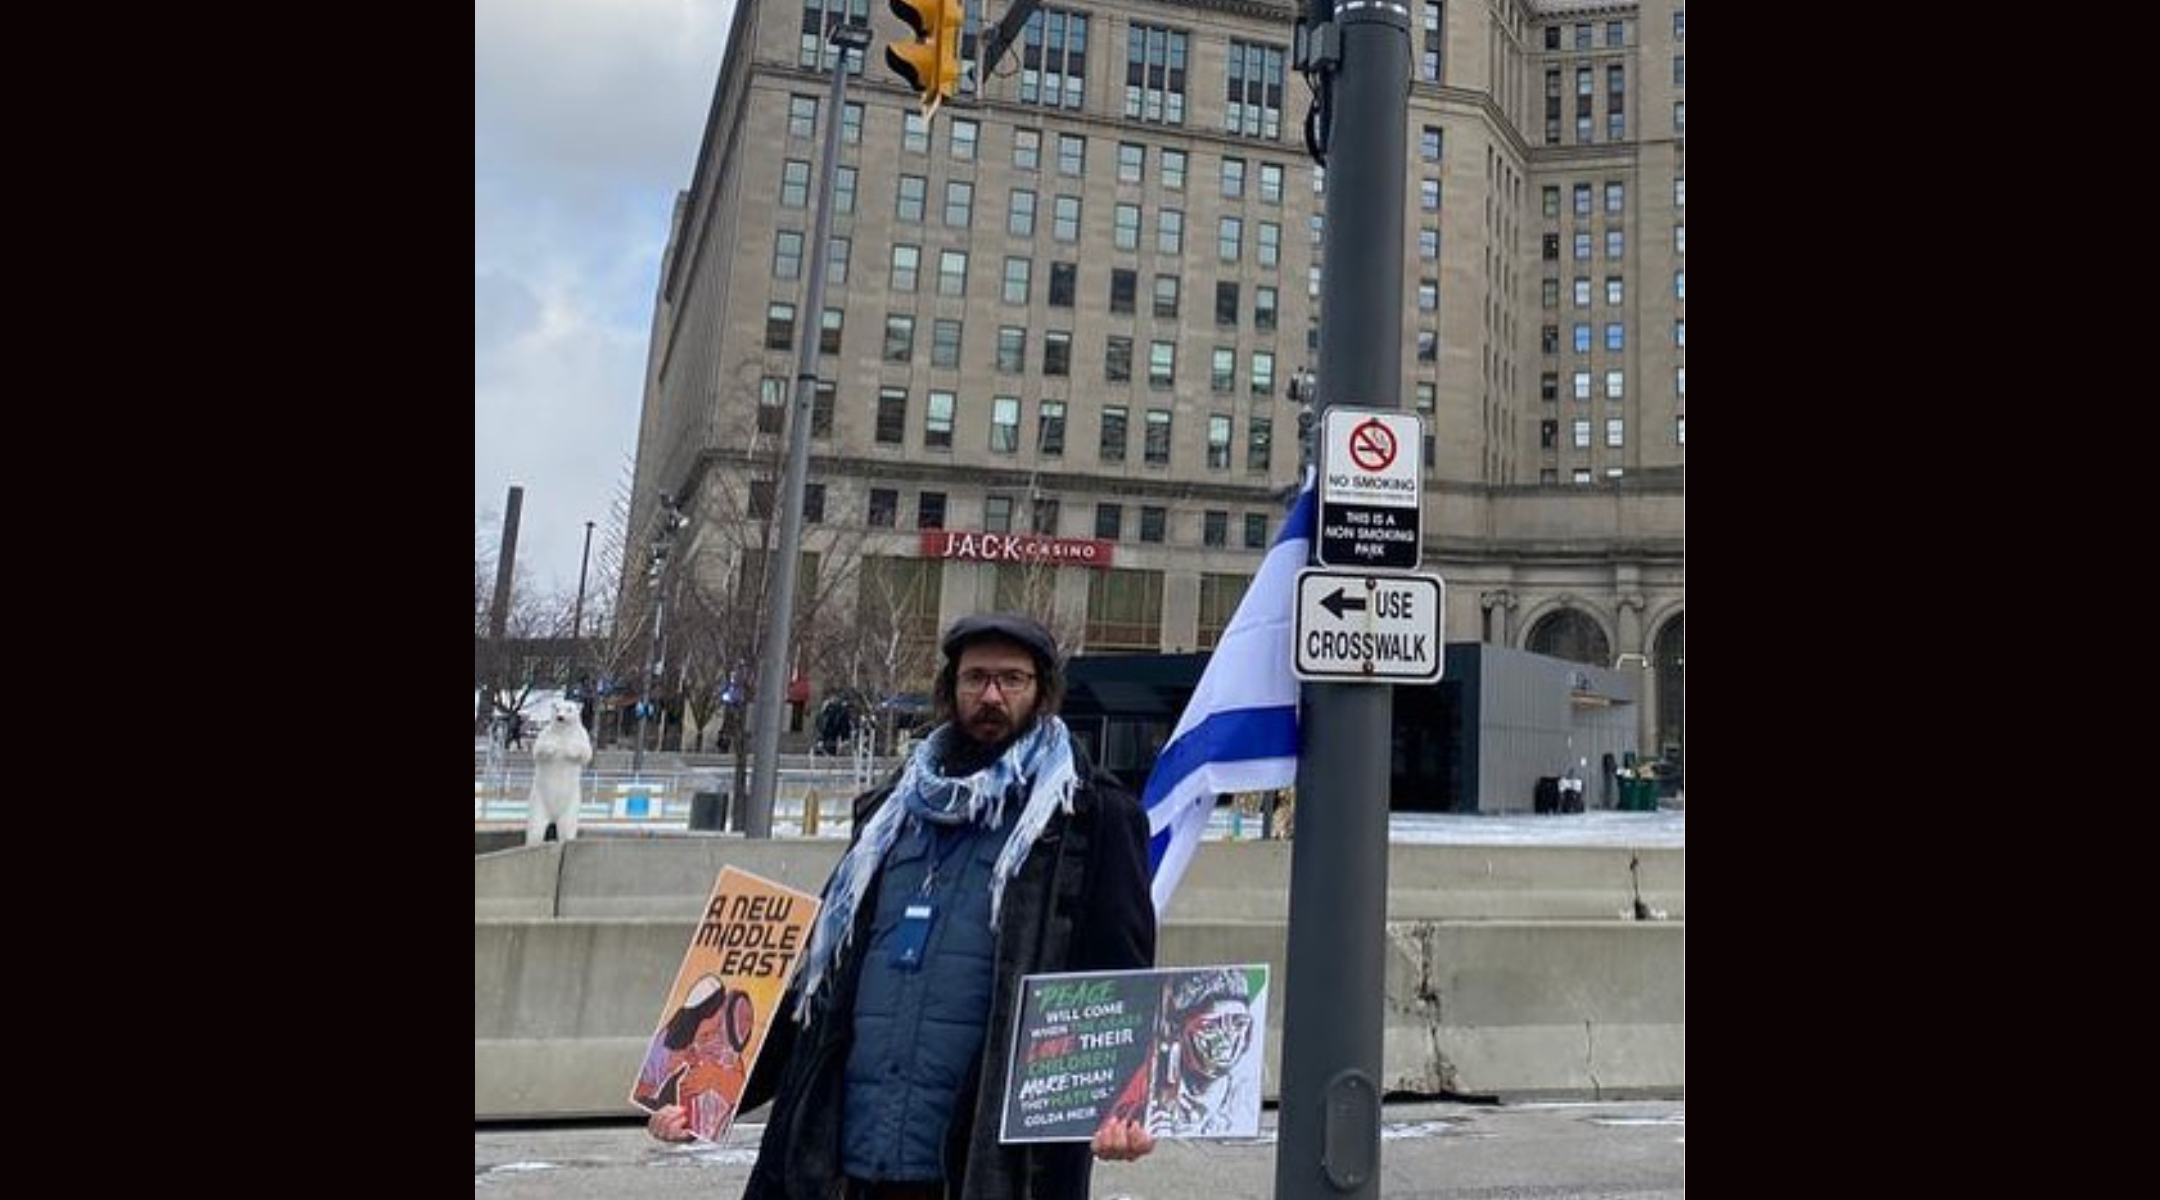 After being barred from Cleveland State University, Rabbi Alex Popivker took to holding his anti-Palestinian protests on a street outside a local casino. (Courtesy Popivker)